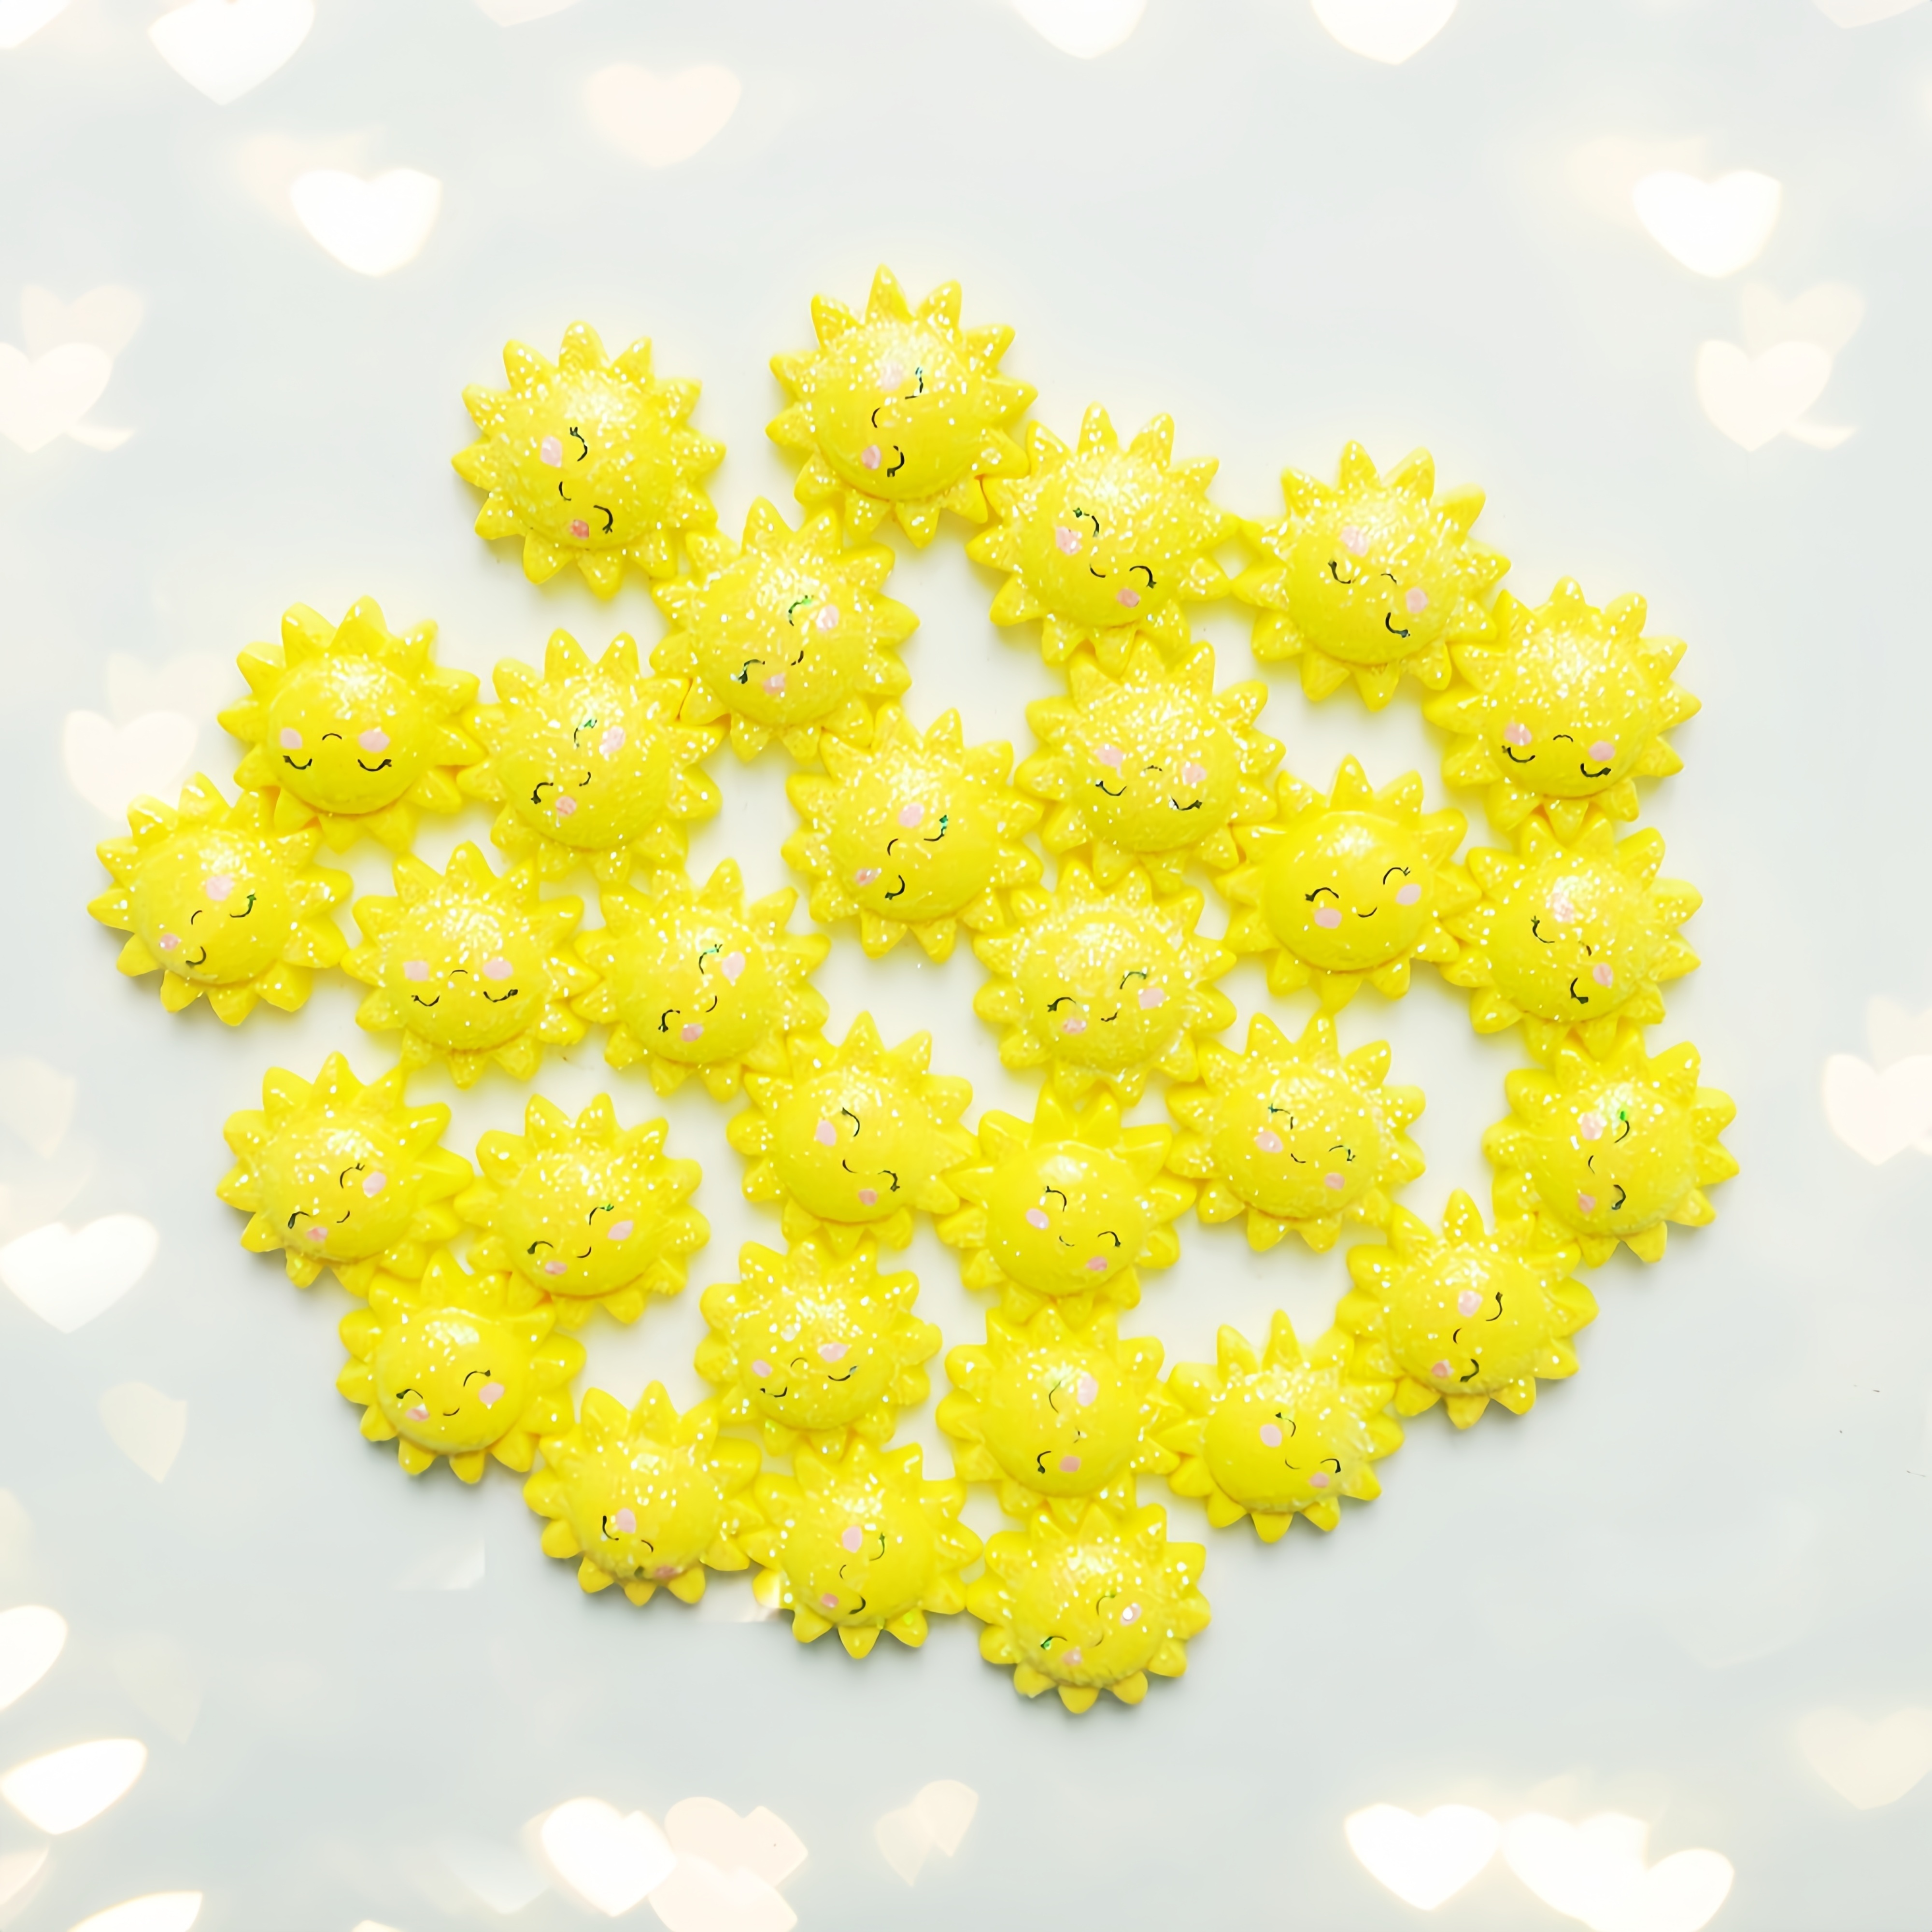 

30pcs Mix Resin Cute Sun Flowers Flatback Figurines Cabochon Resin Patches For Diy Bow Home Decor Accessories Crafts For Diy Craft, Scrapbook Decoration